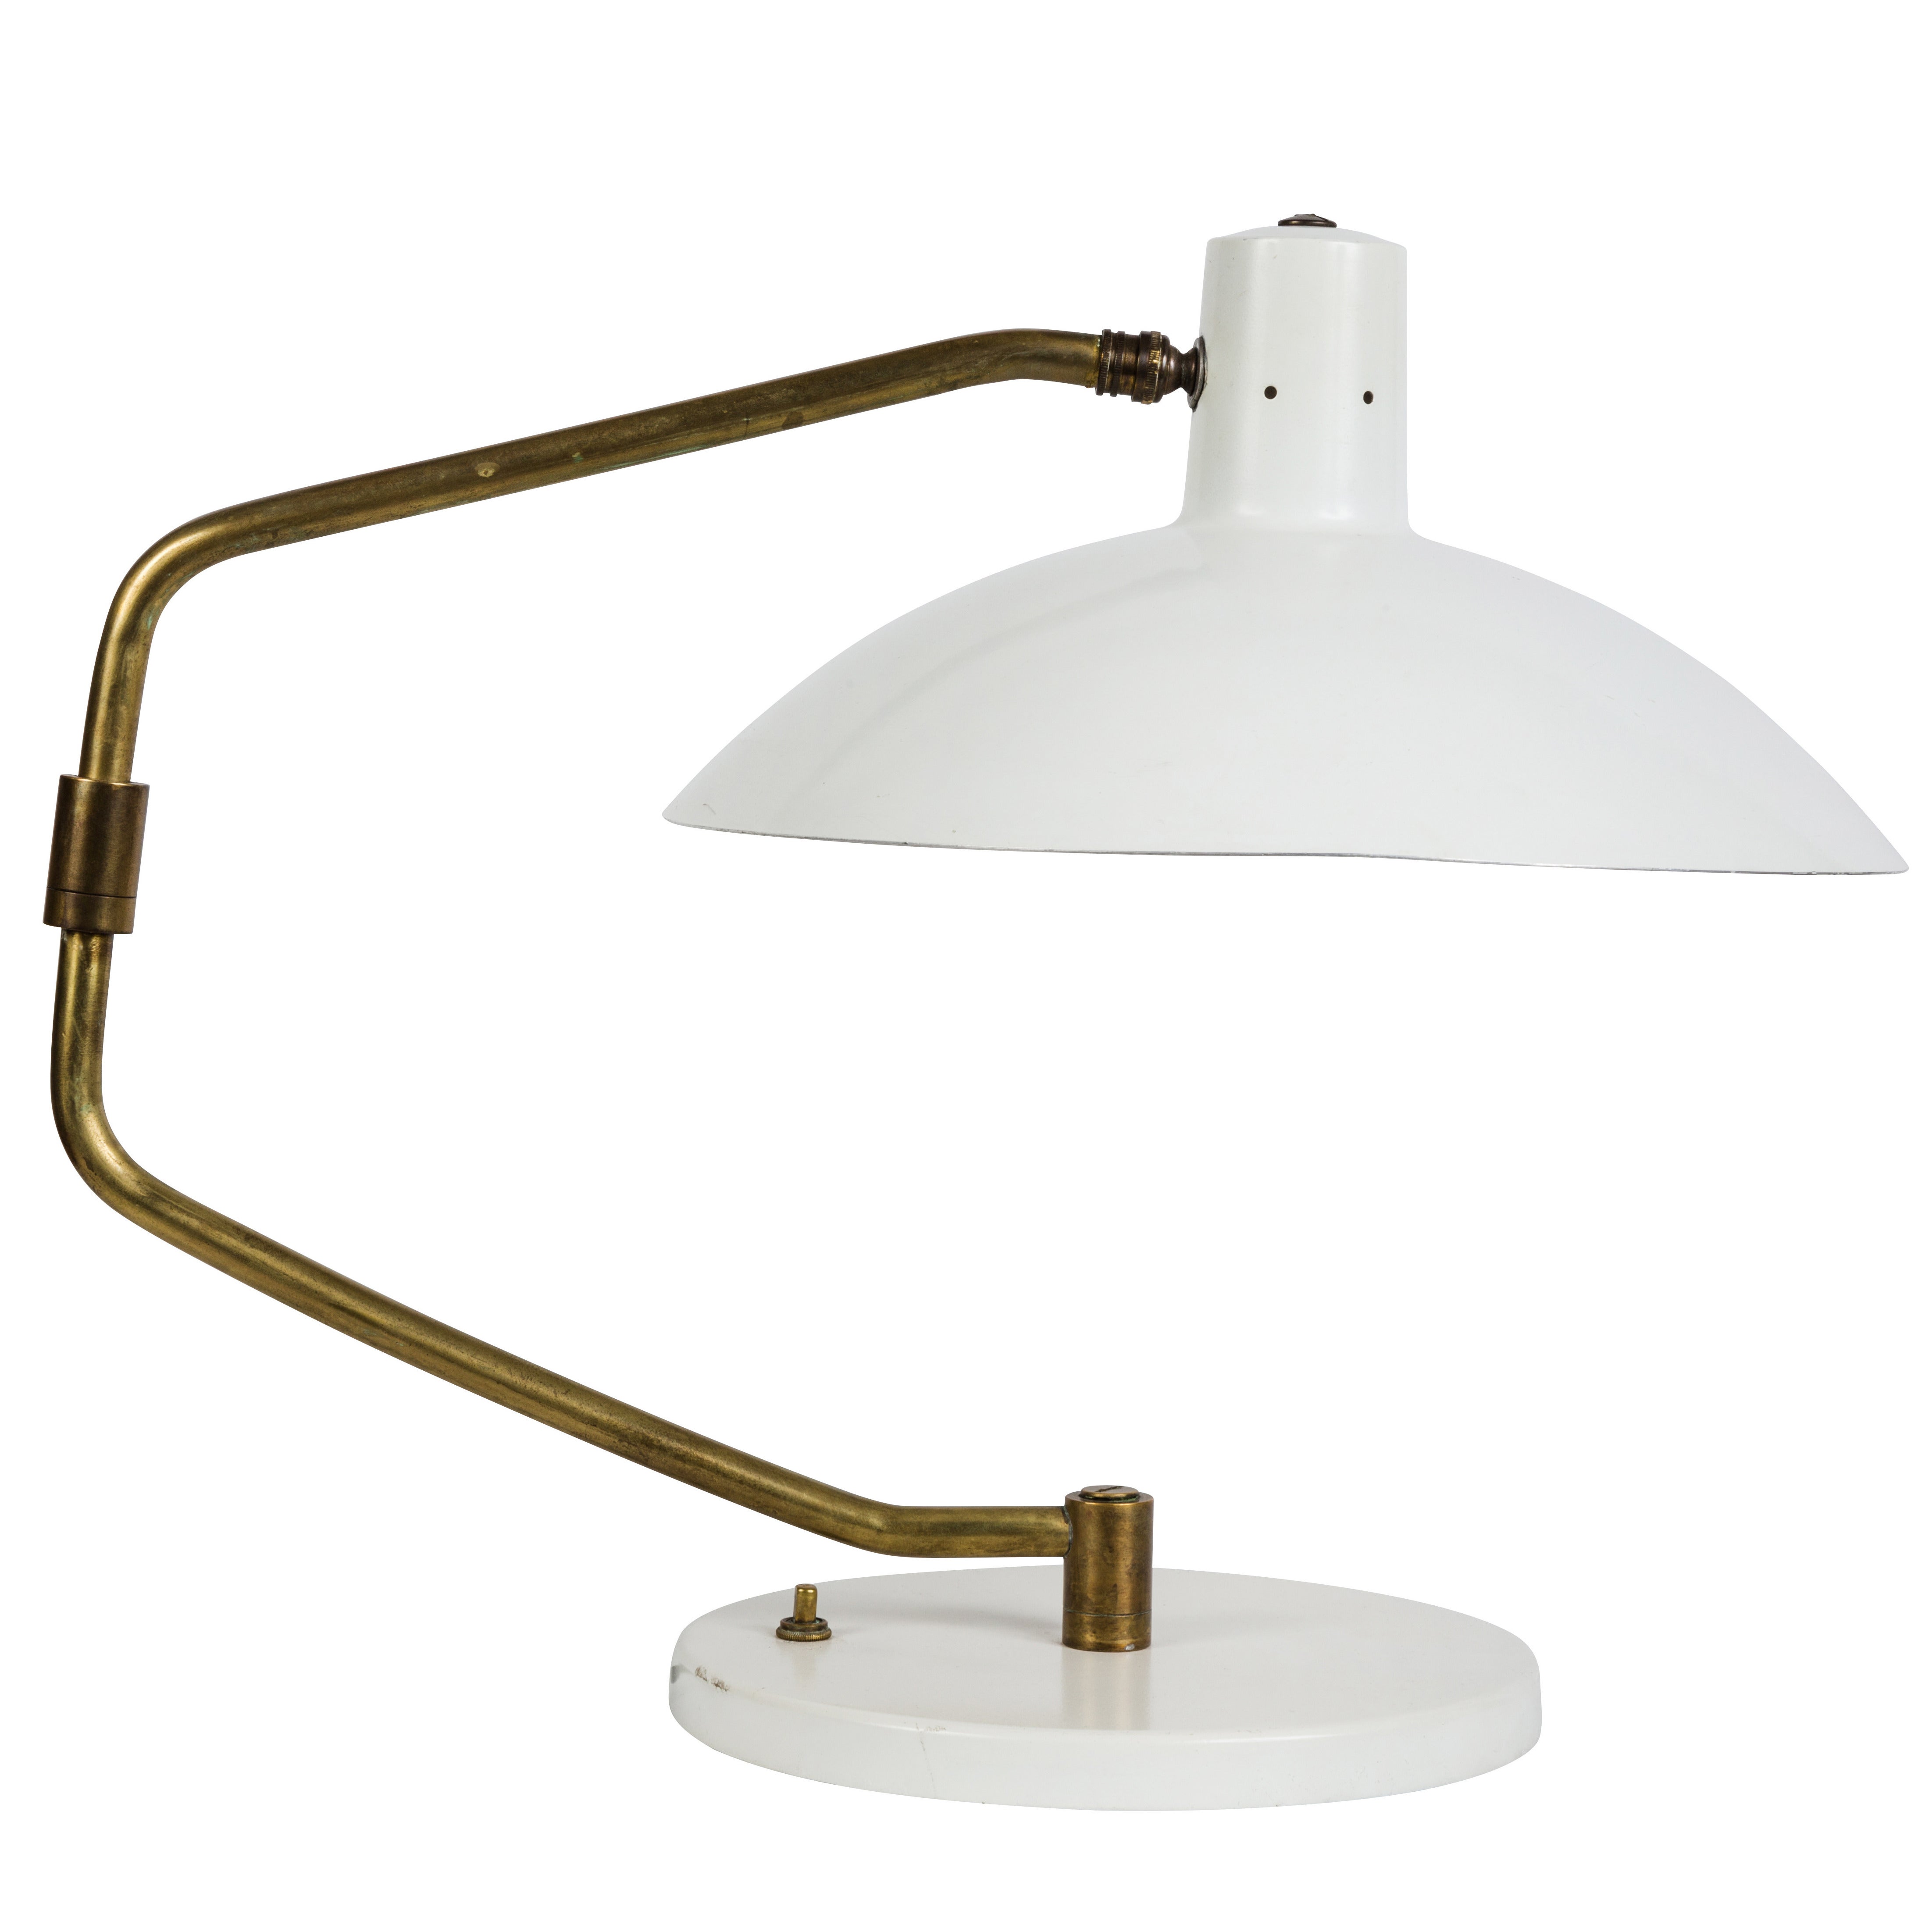 Clay Michie No. 4 Table Lamp for Knoll